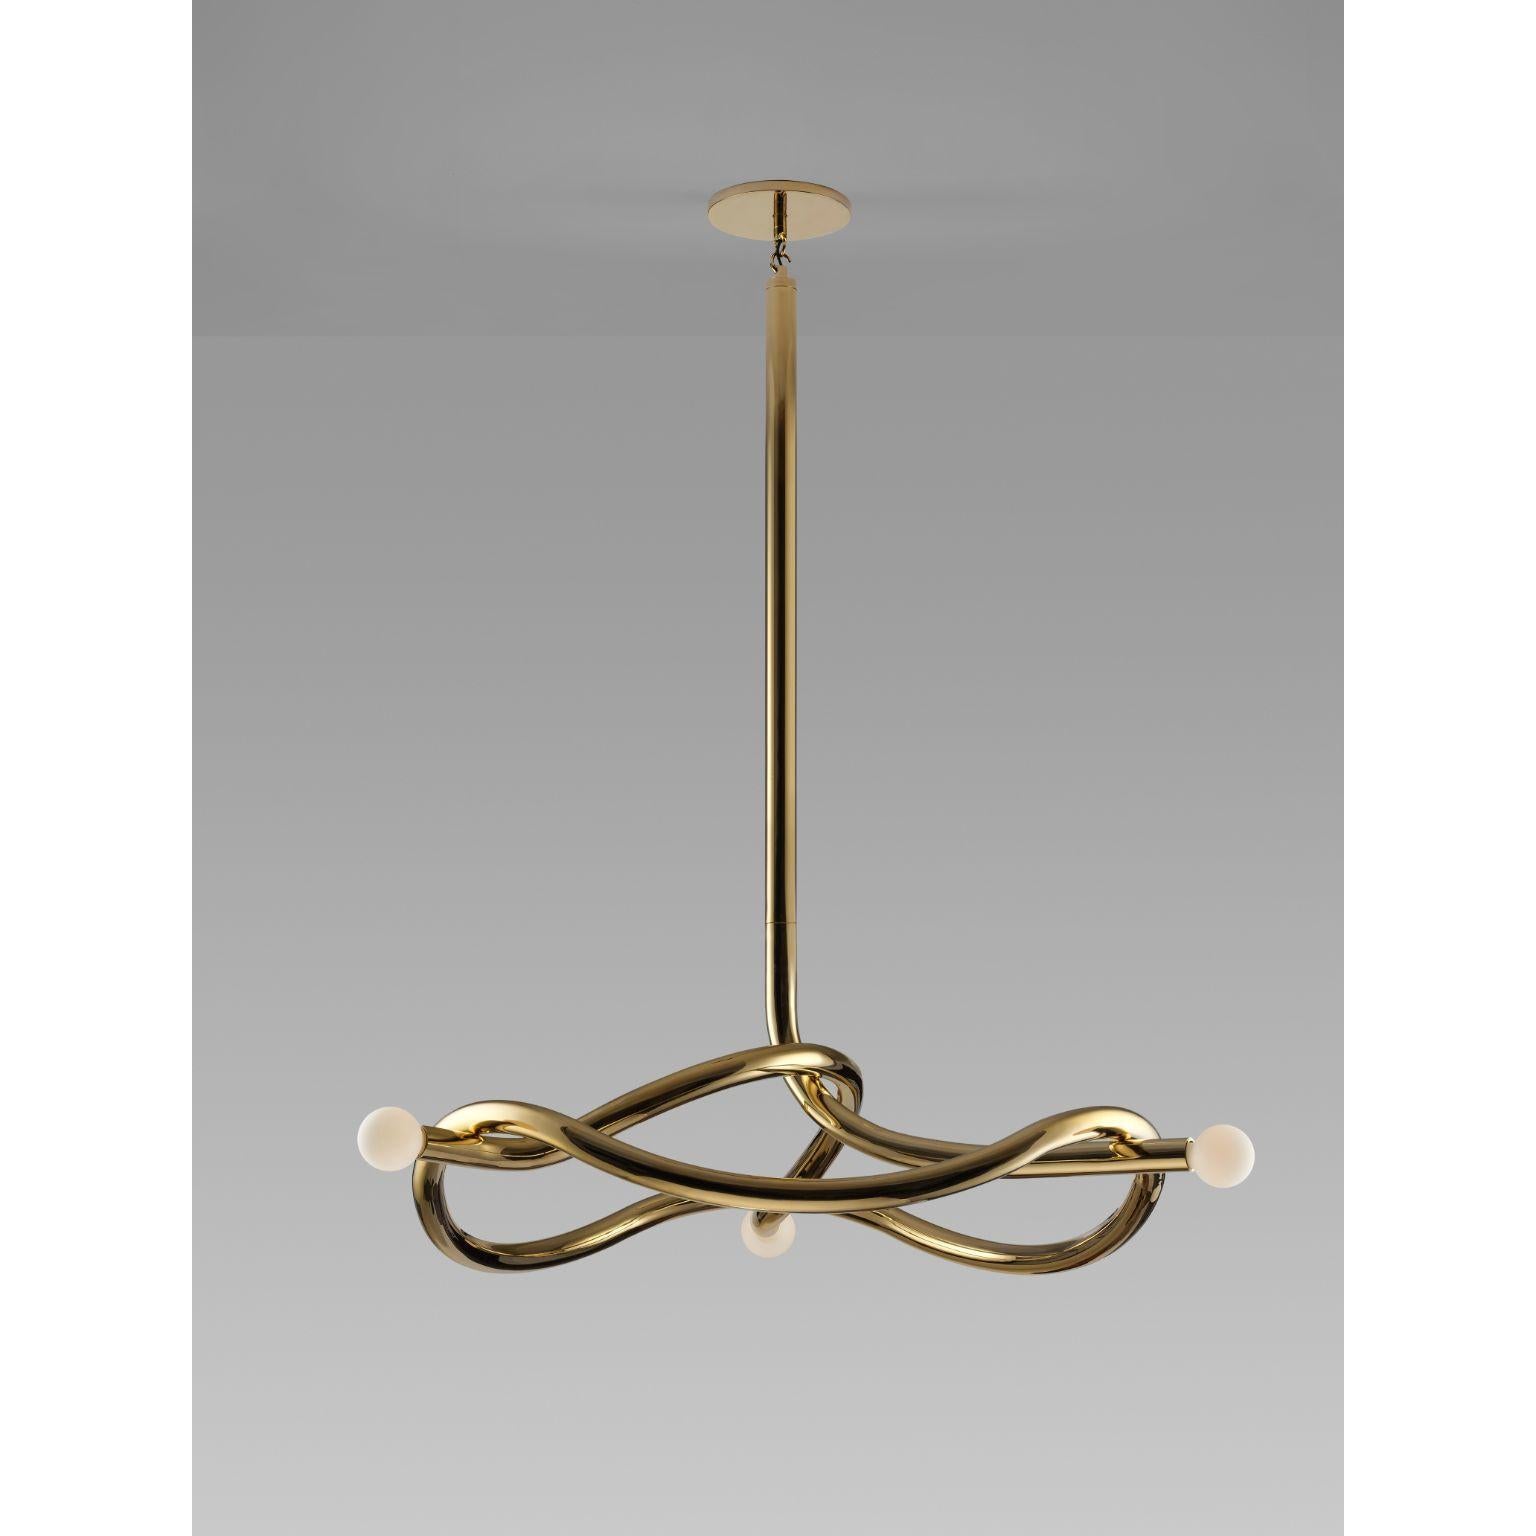 Tryst three chandelier by Paul Matter.
Materials: brass and porcelain finish glass.
Dimensions: W 114.3 x H 182.8 cm.
Wight: 15 kg.

Tryst chandelier explores the relationship between interlocked forms in perfect union and balance. A study of